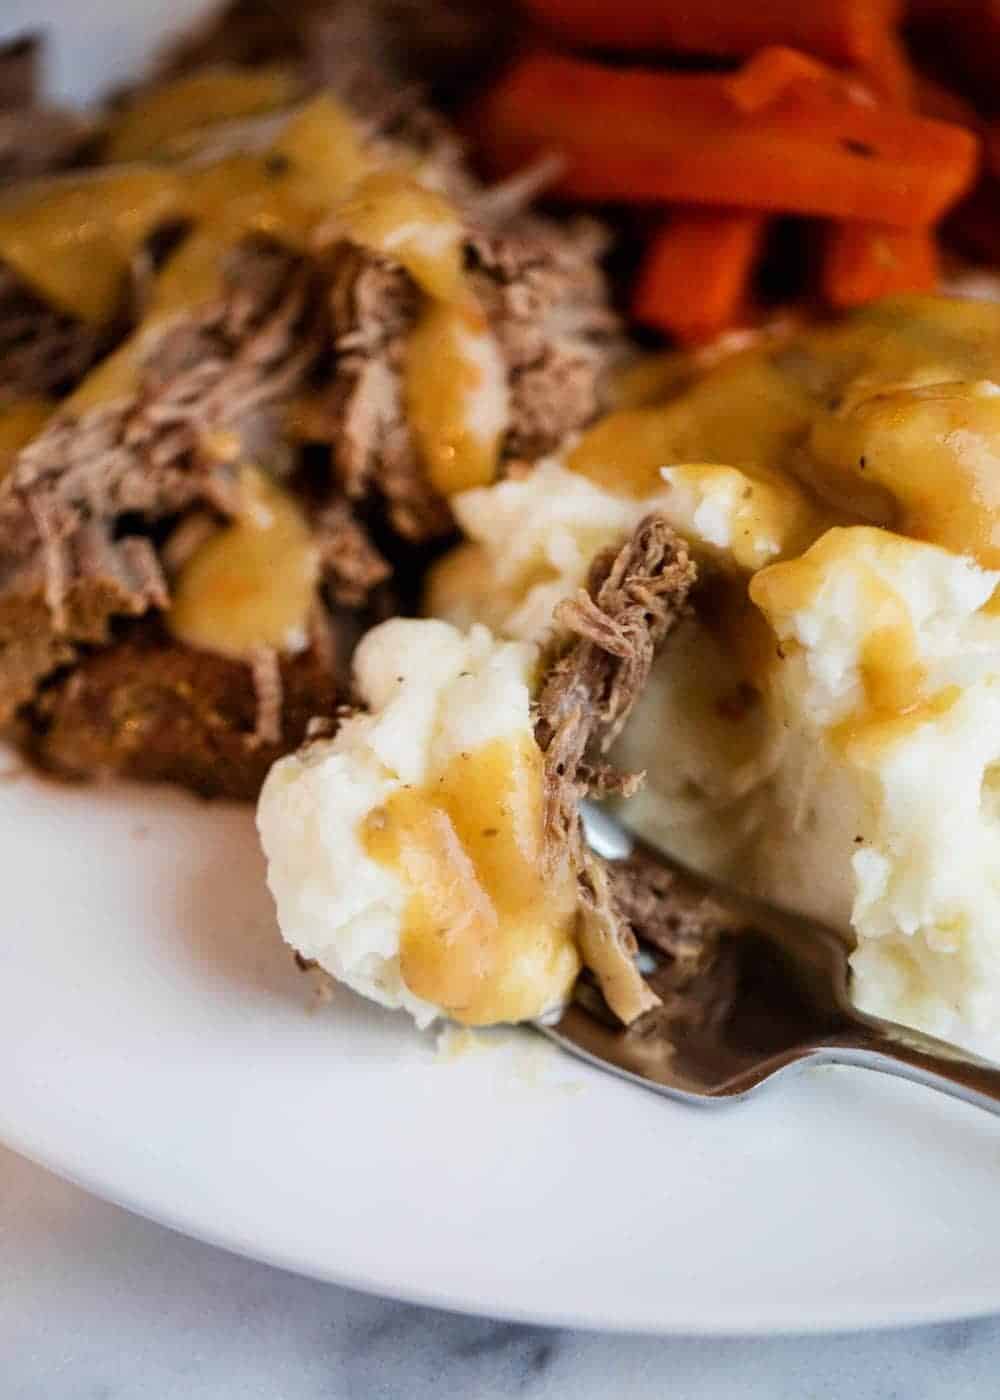 Pot roast on plate with mashed potatoes and gravy.